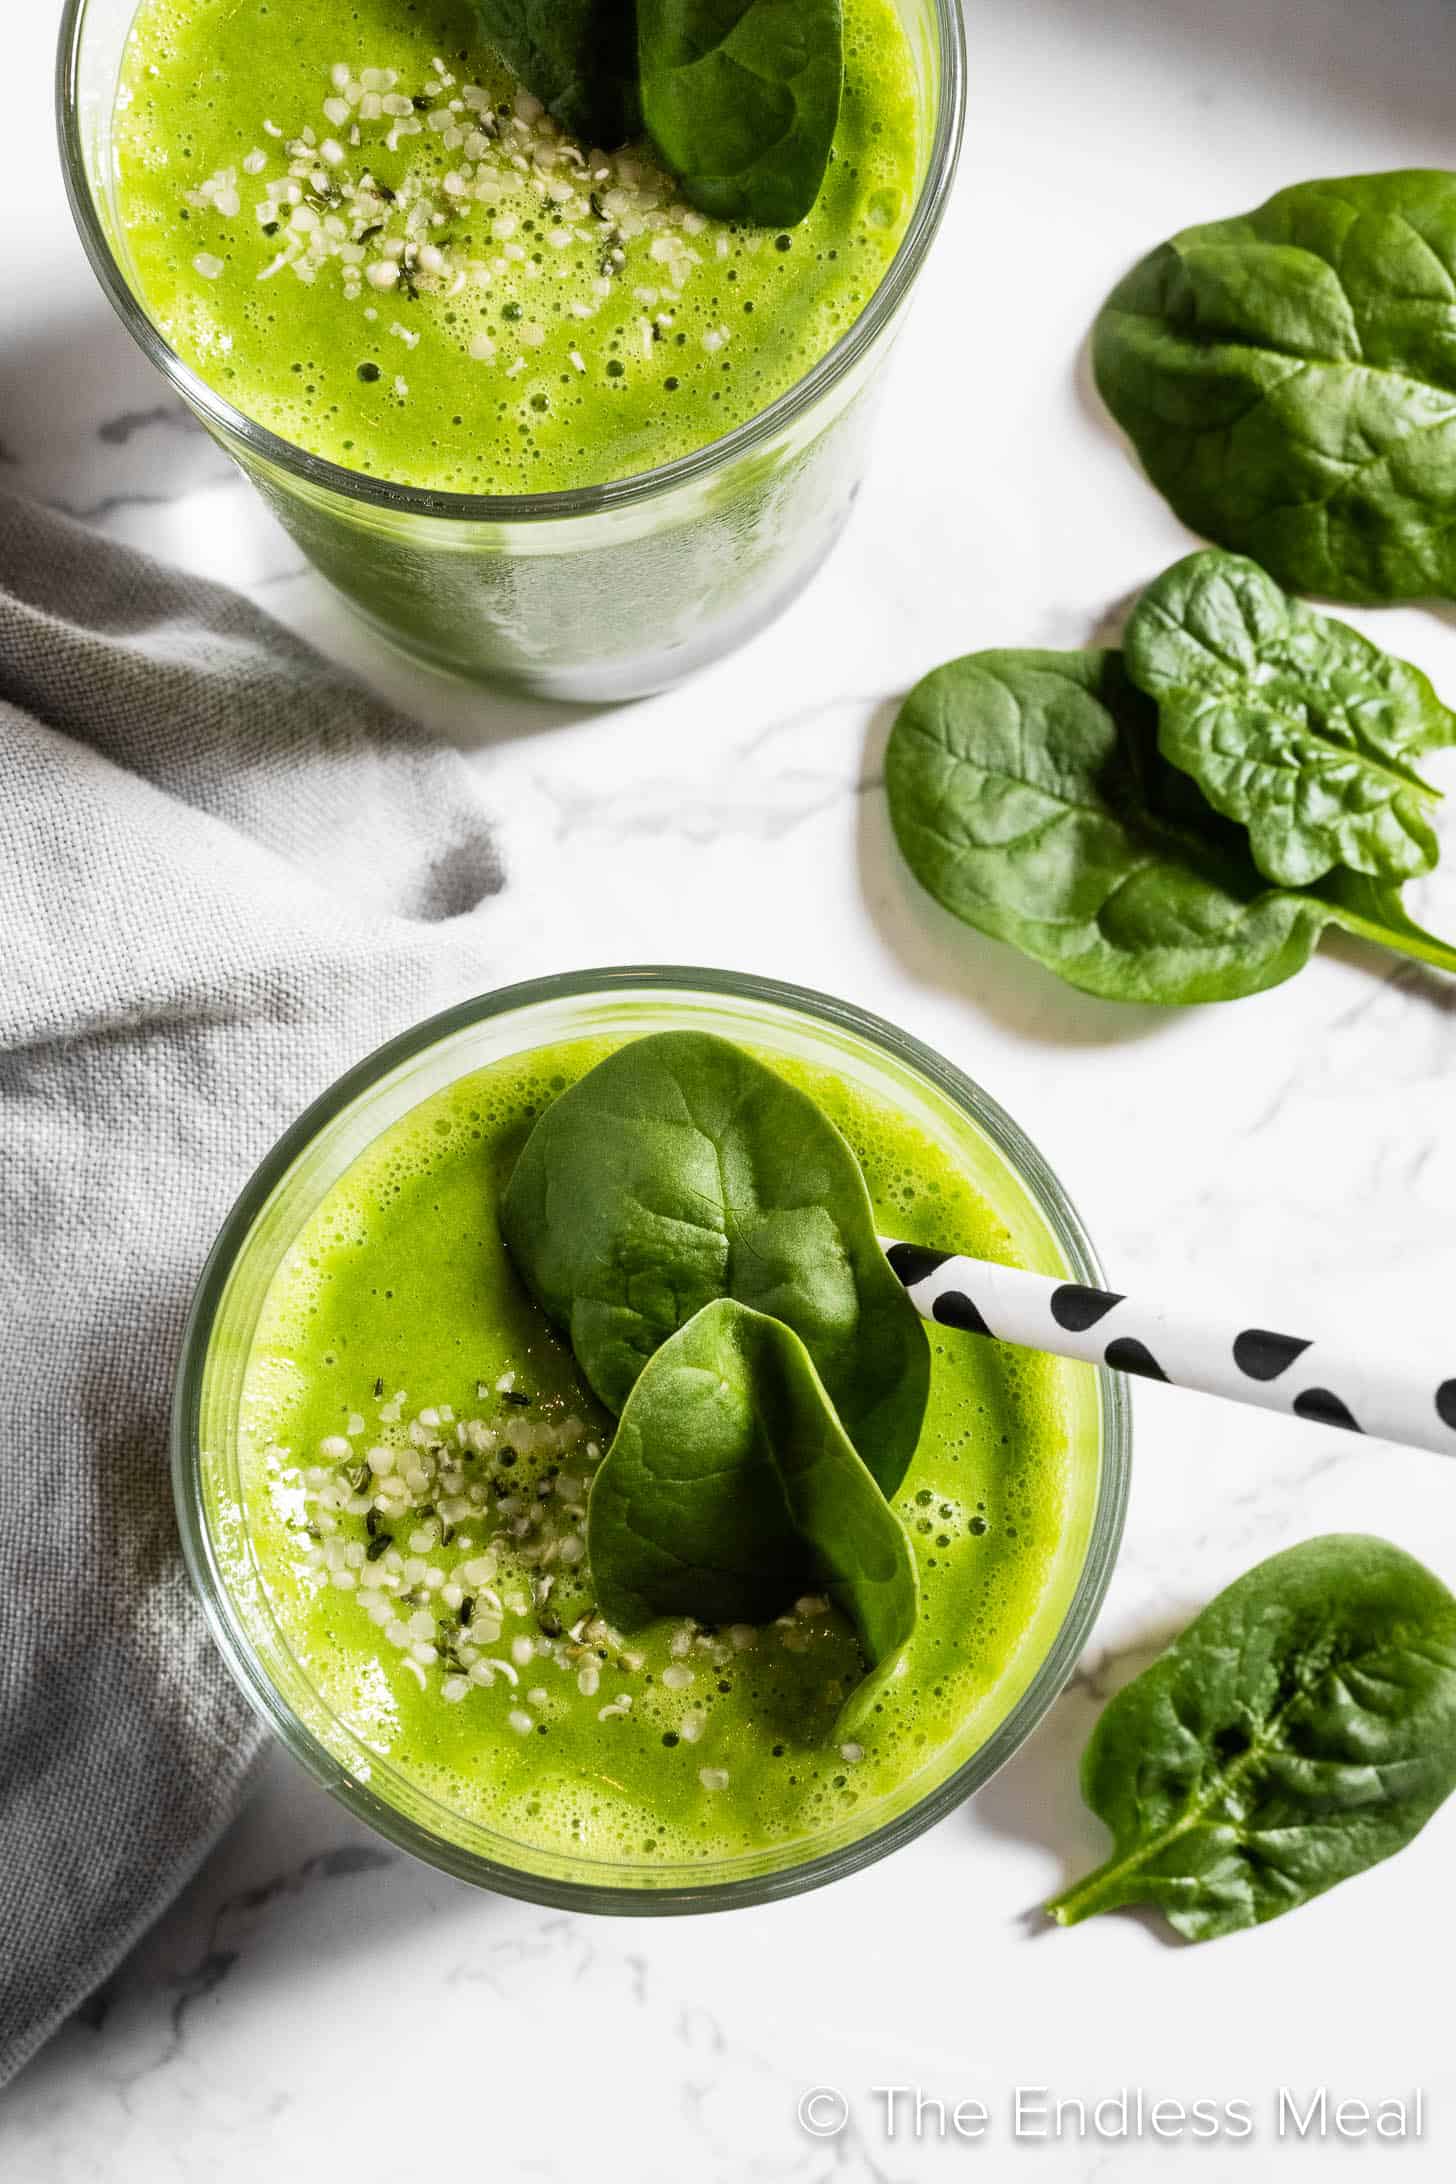 Looking down on a Spinach Smoothie for breakfast